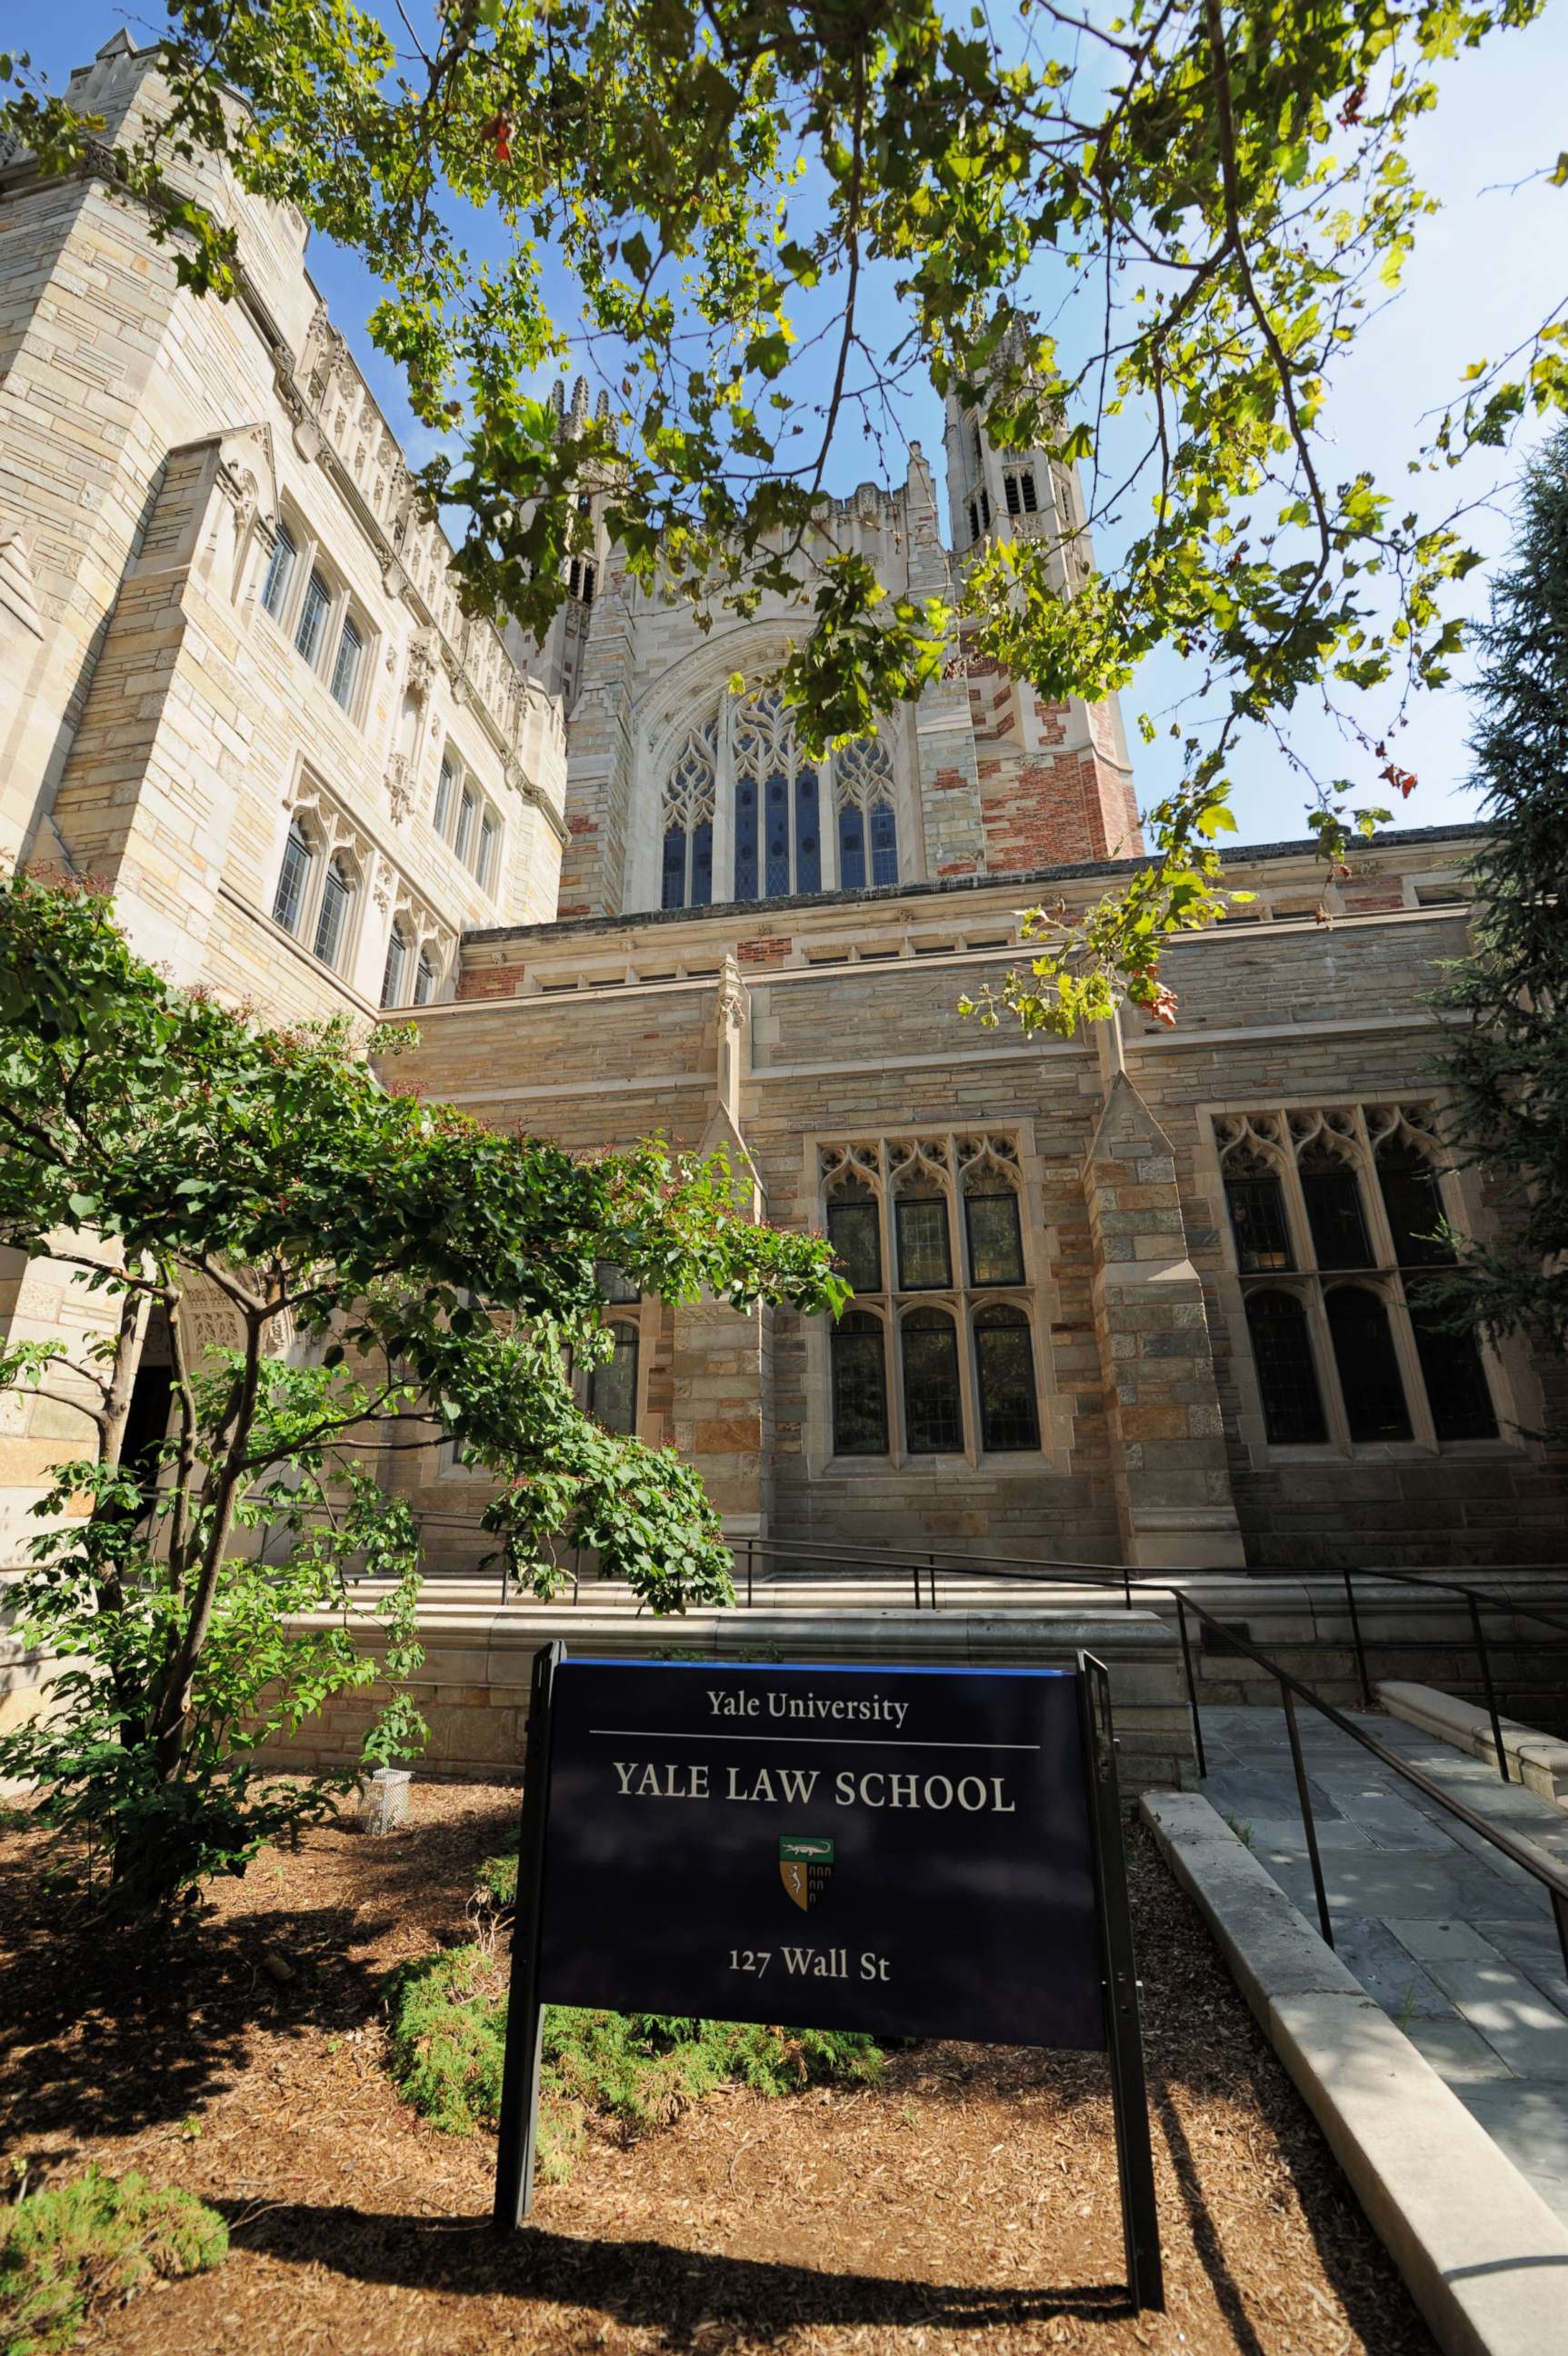 PHOTO: A sign in front of Yale Law School on the campus of Yale University in New Haven, Conn.